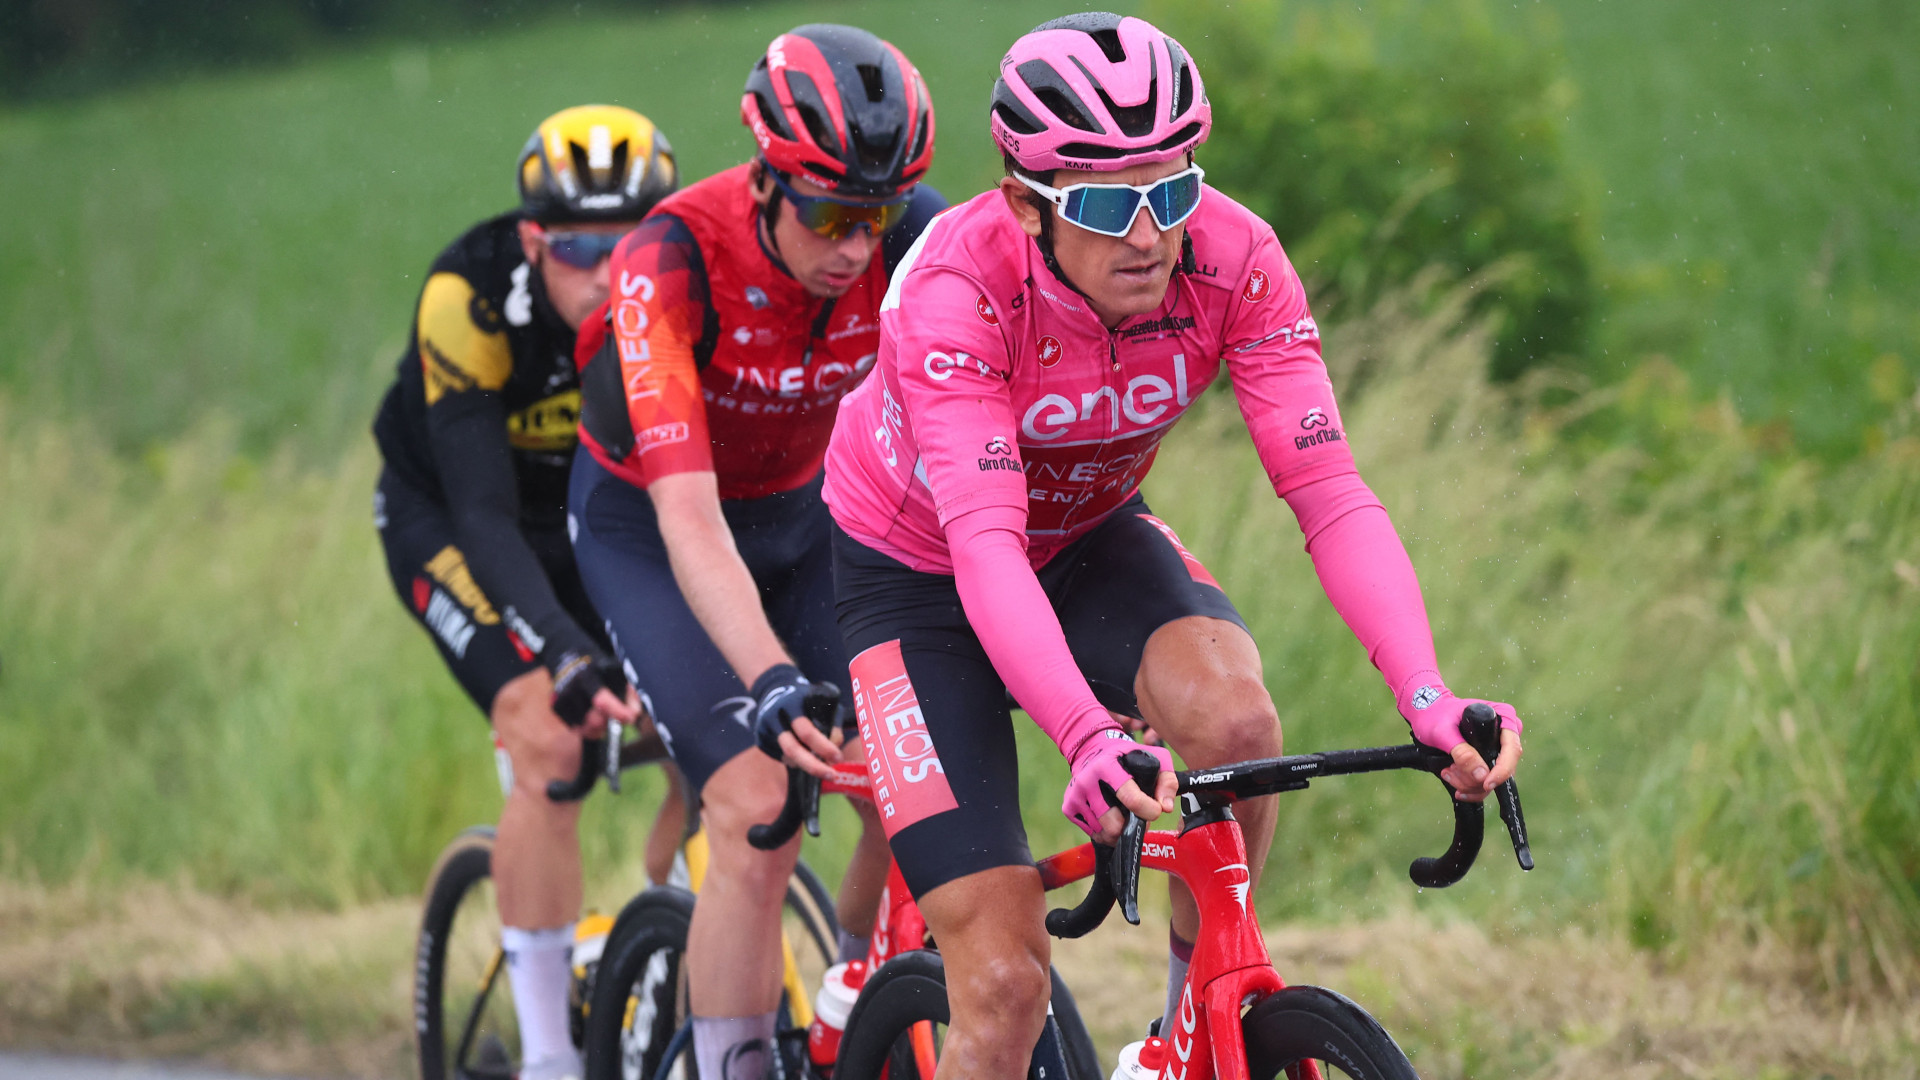 How to watch Giro d'Italia live stream the cycling for free, Stage 19